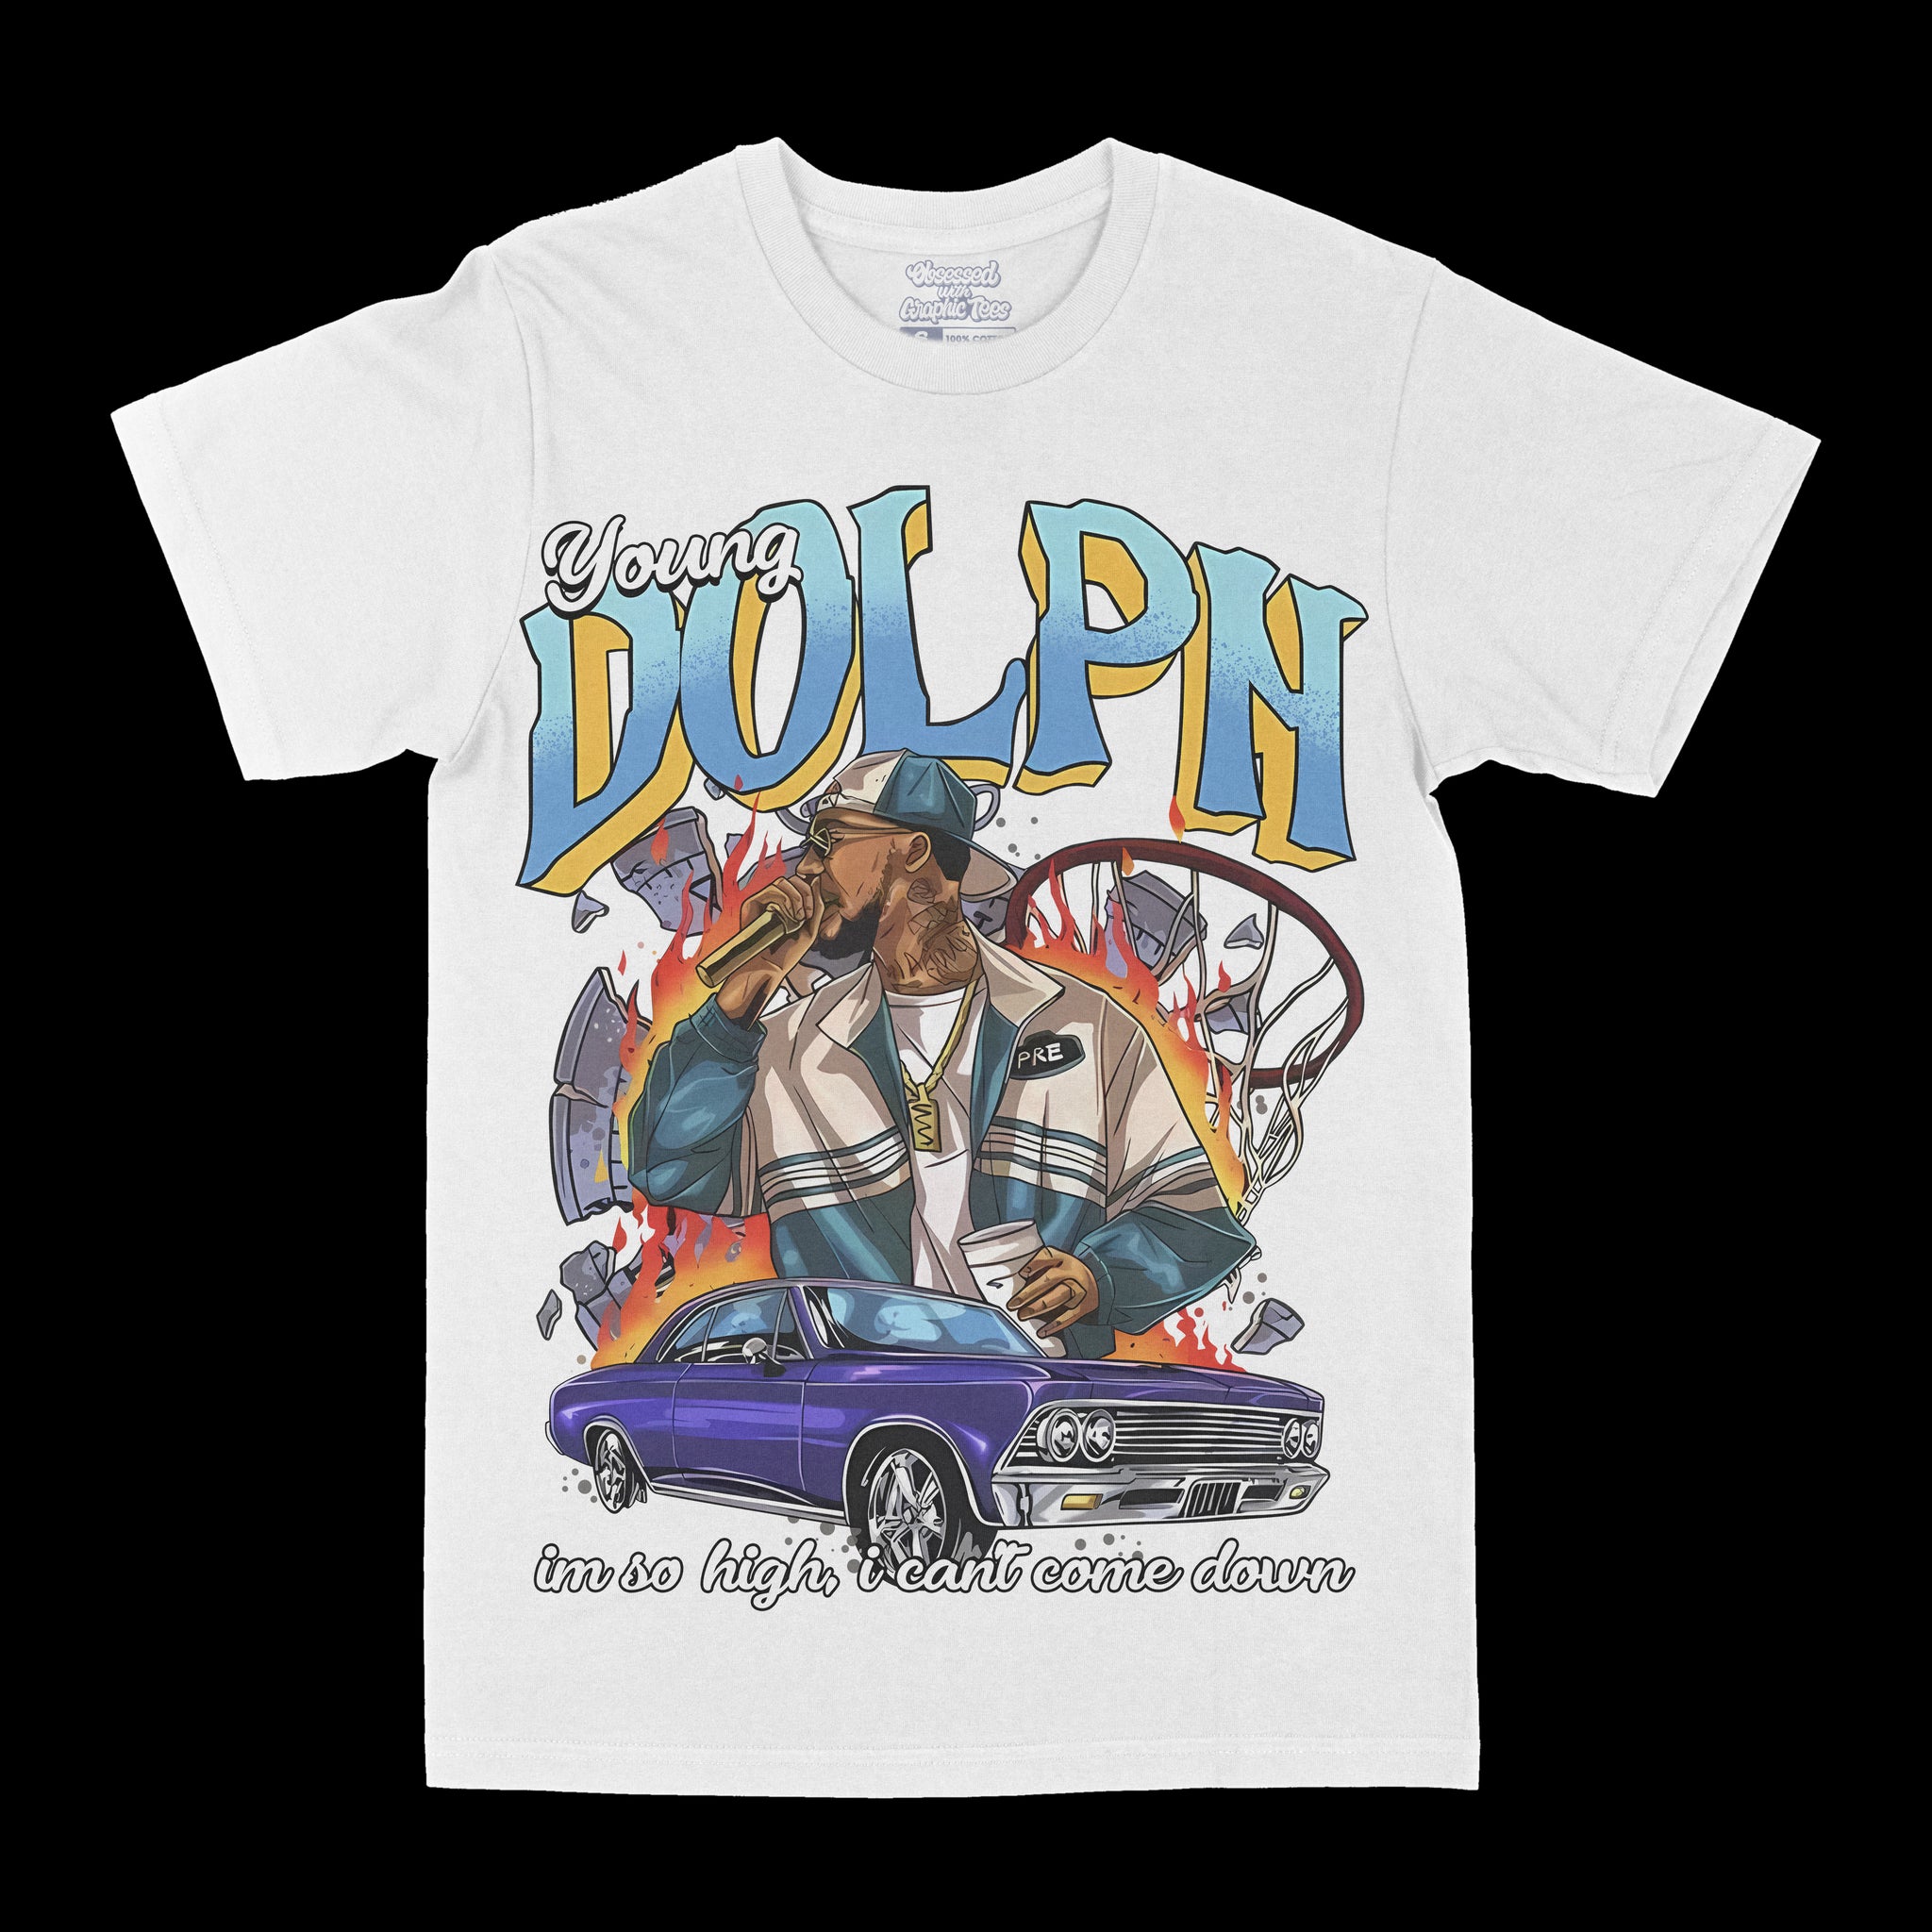 Young Dolph "Come Down" Graphic Tee